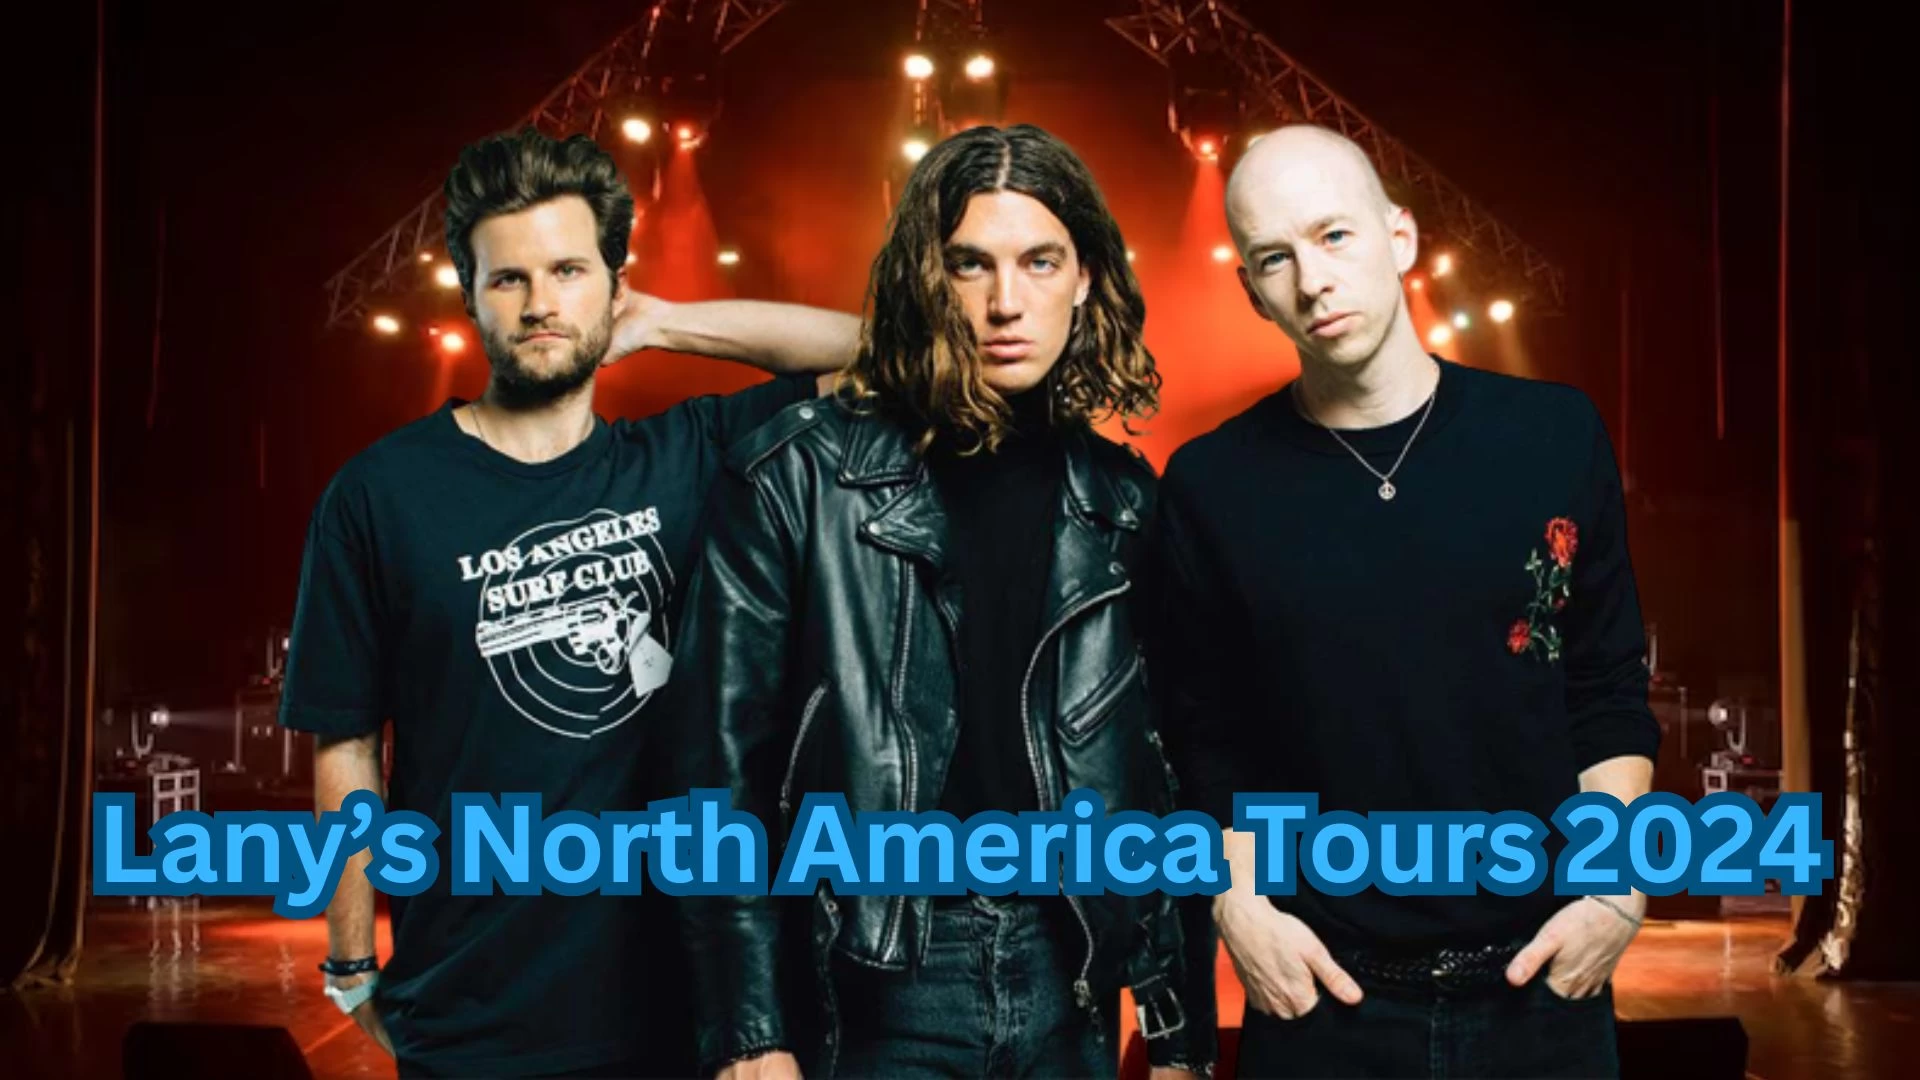 Lany Presale Code 2024, How to Get Presale Code For Lany's North America Tour 2024?